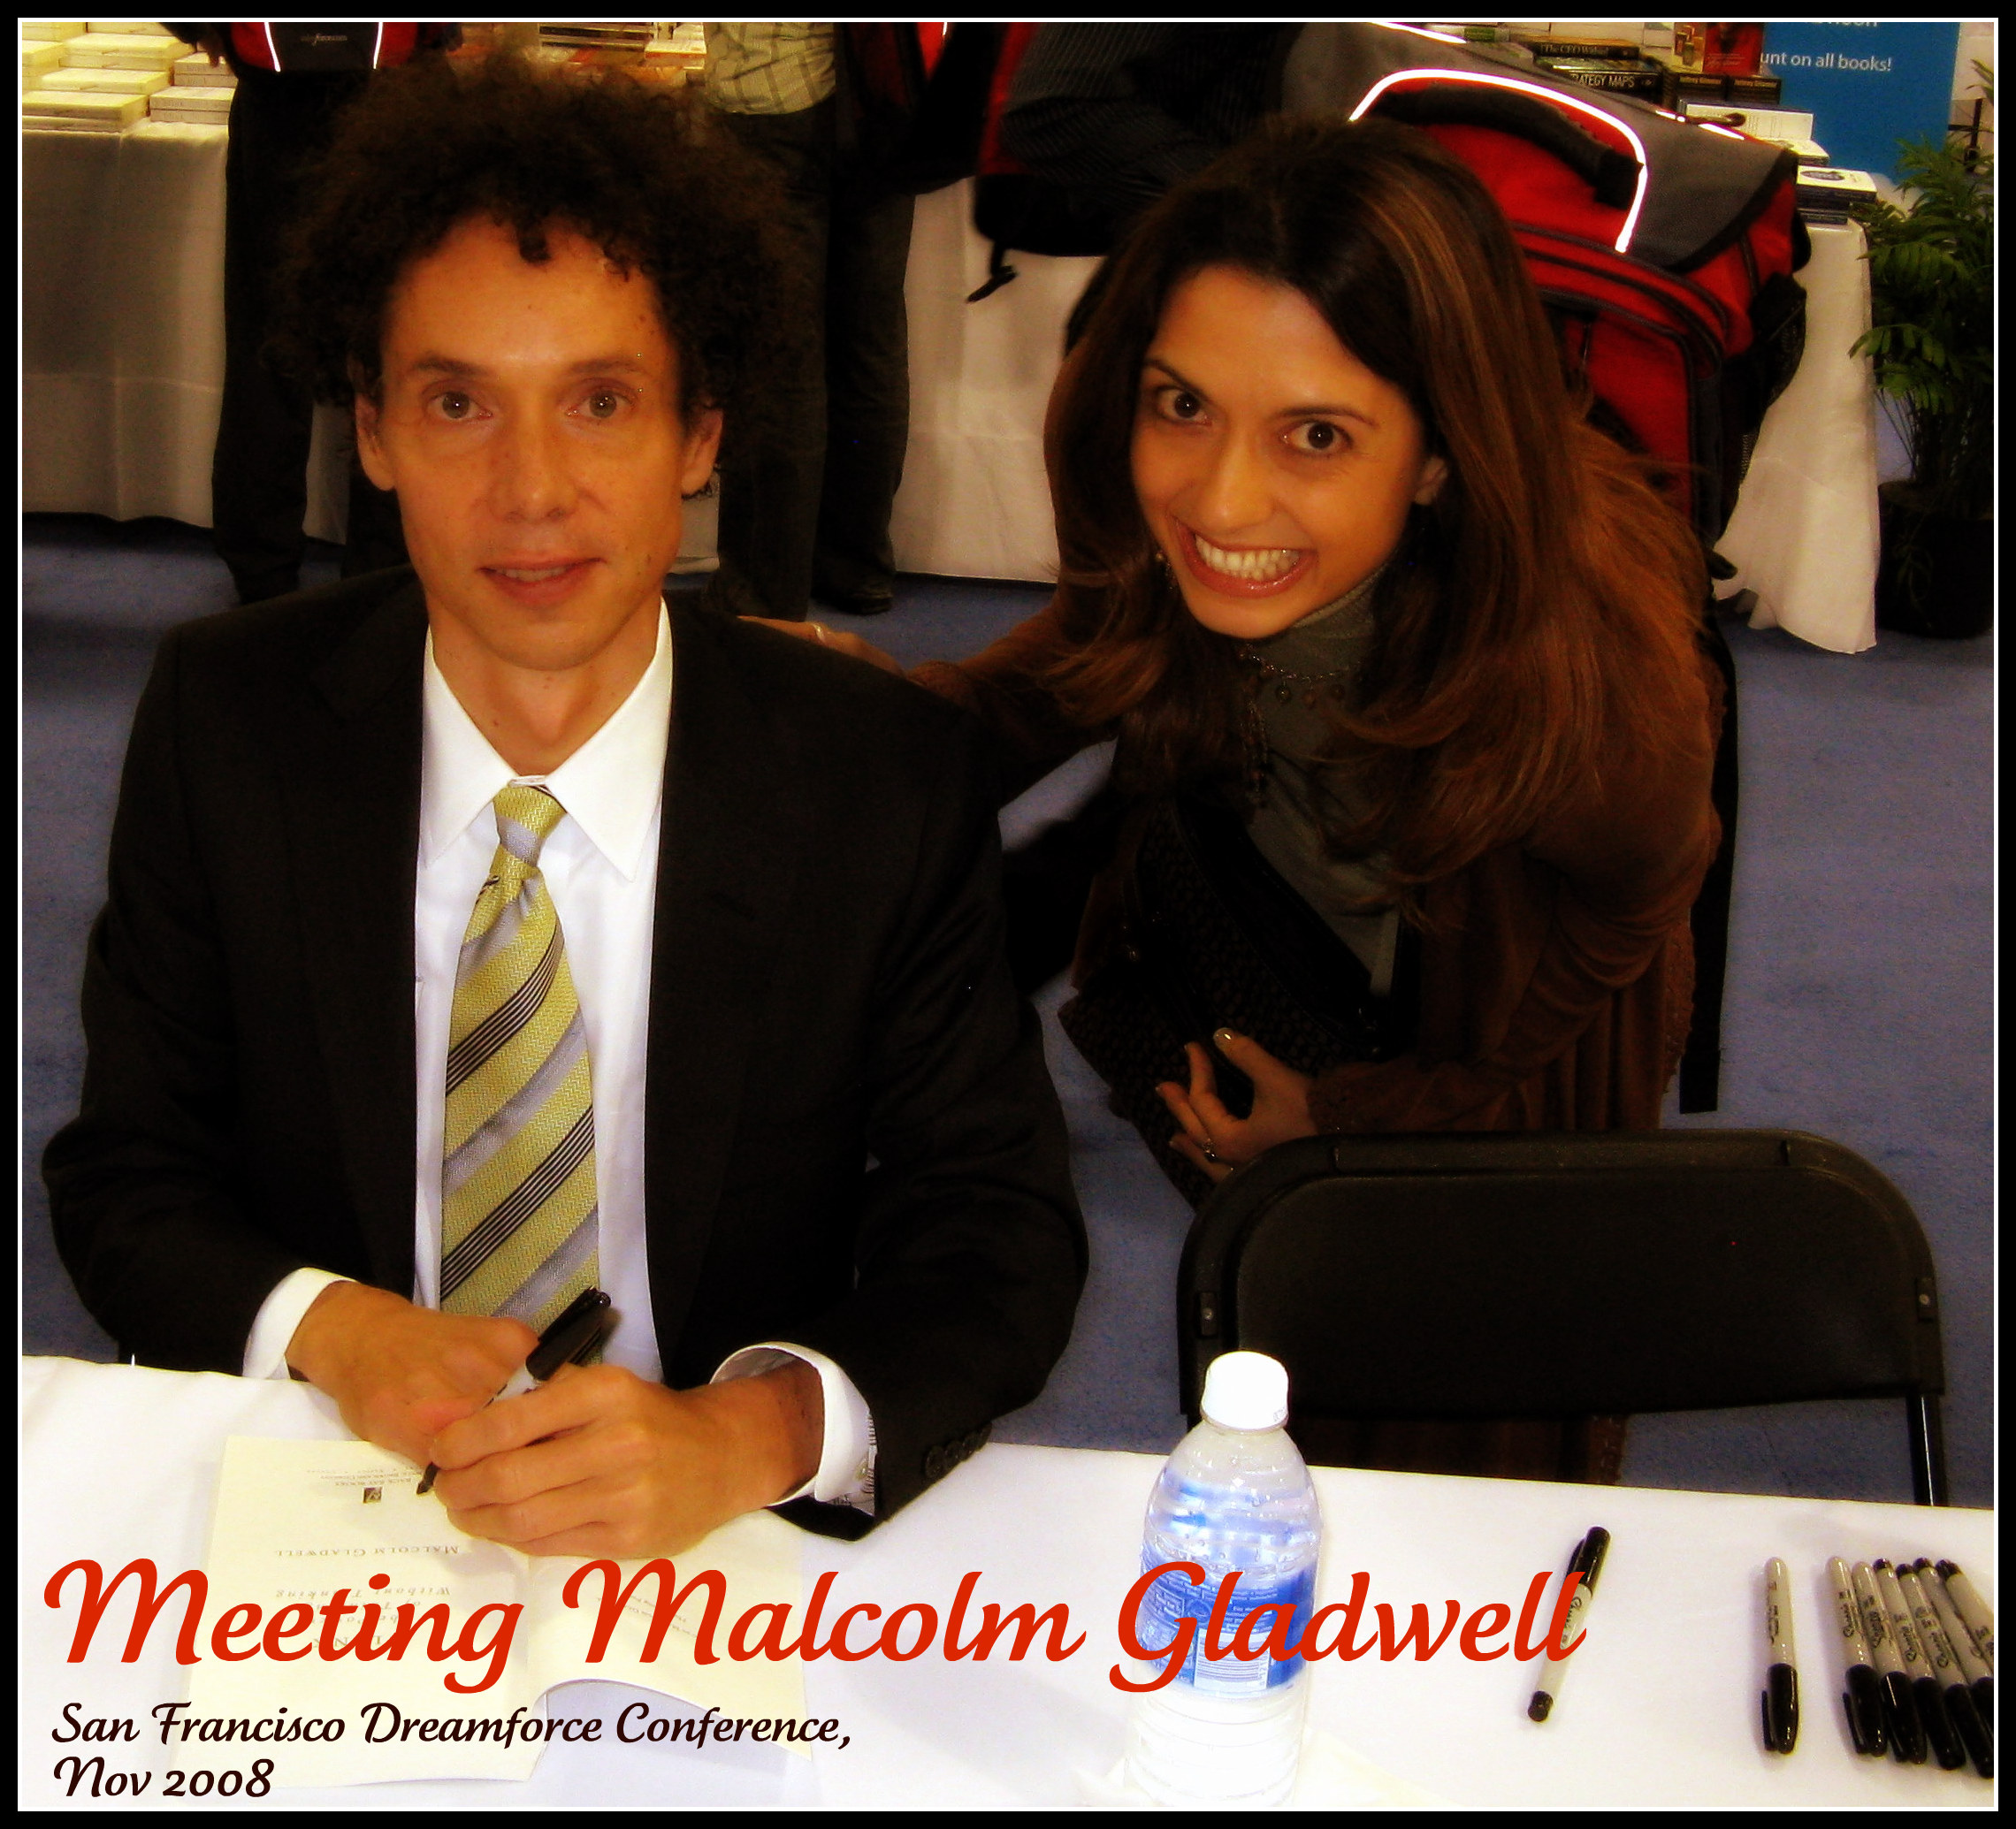 Meeting Malcolm Gladwell in San Francisco Salesforce conference